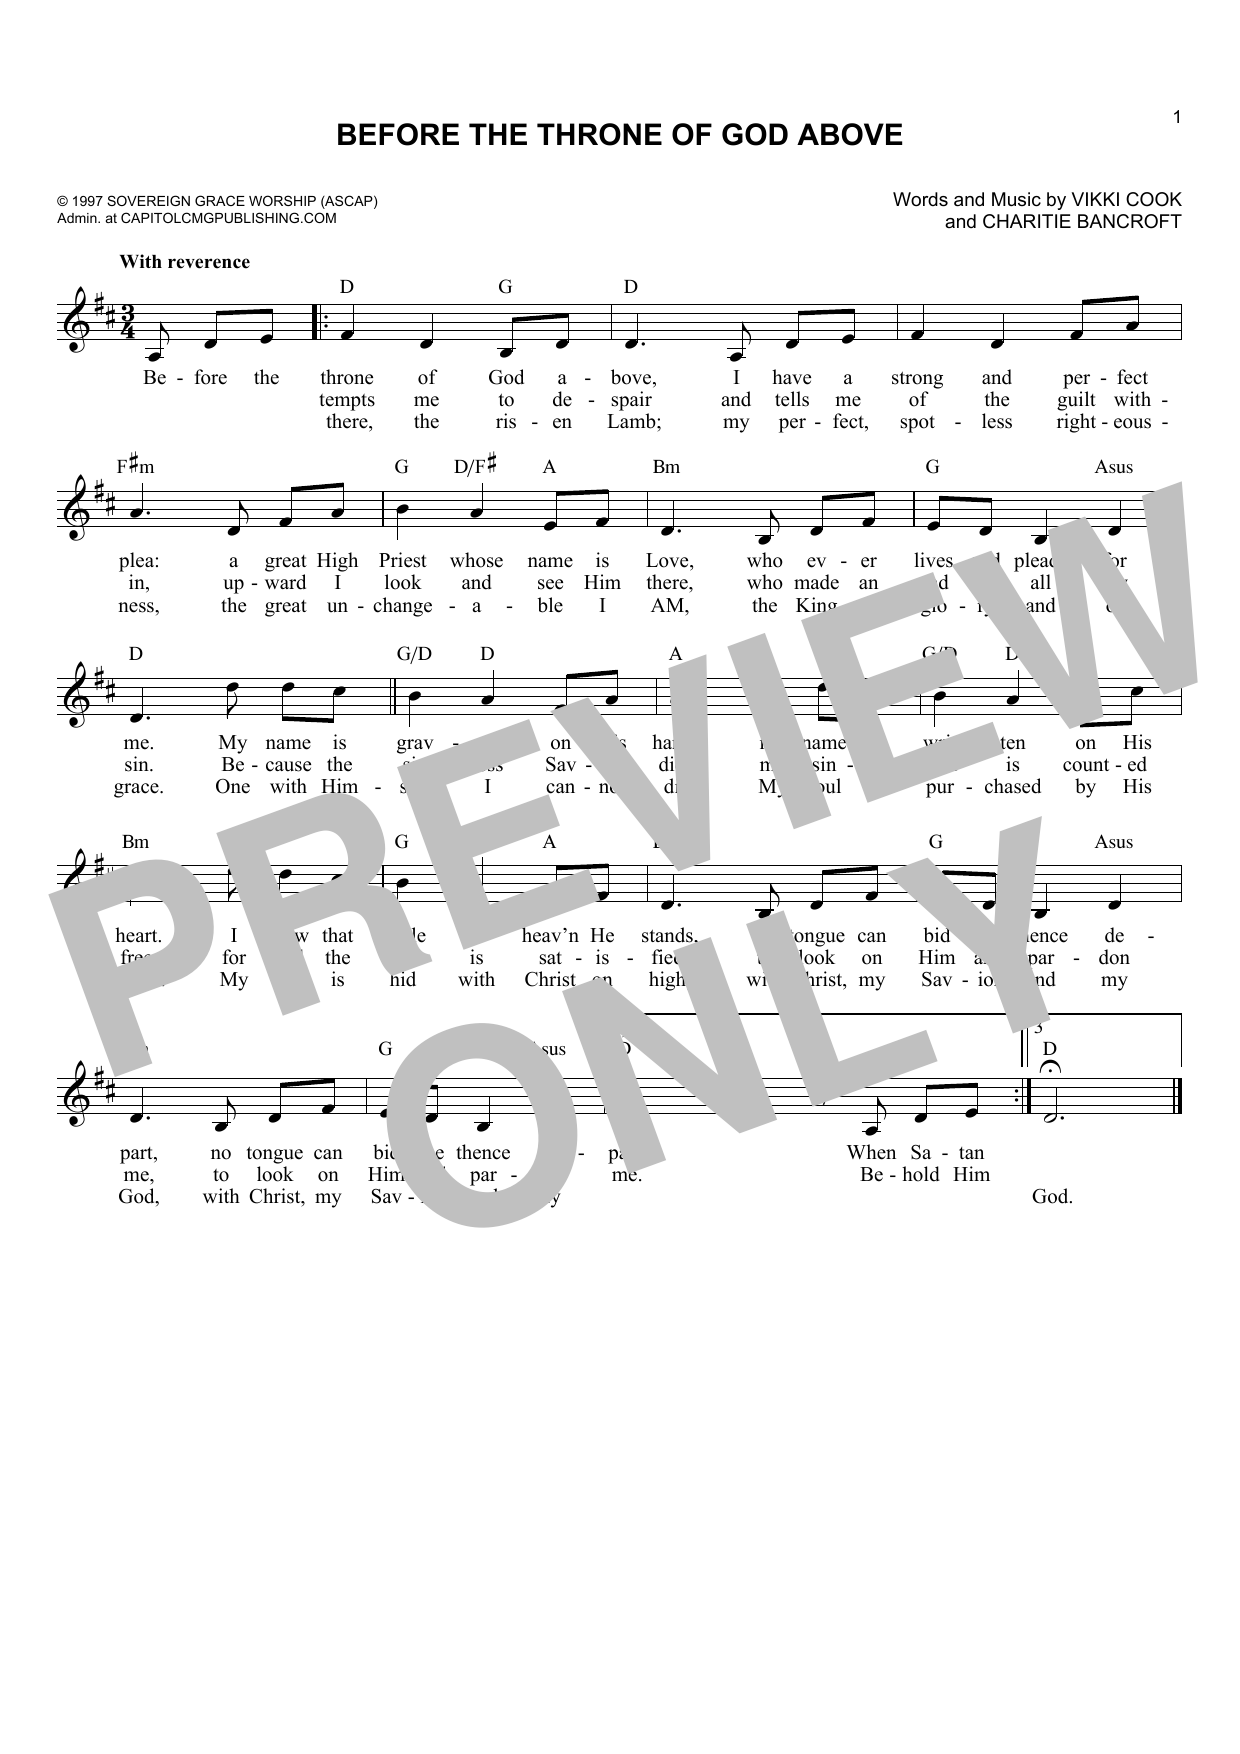 Download Vikki Cook Before The Throne Of God Above Sheet Music